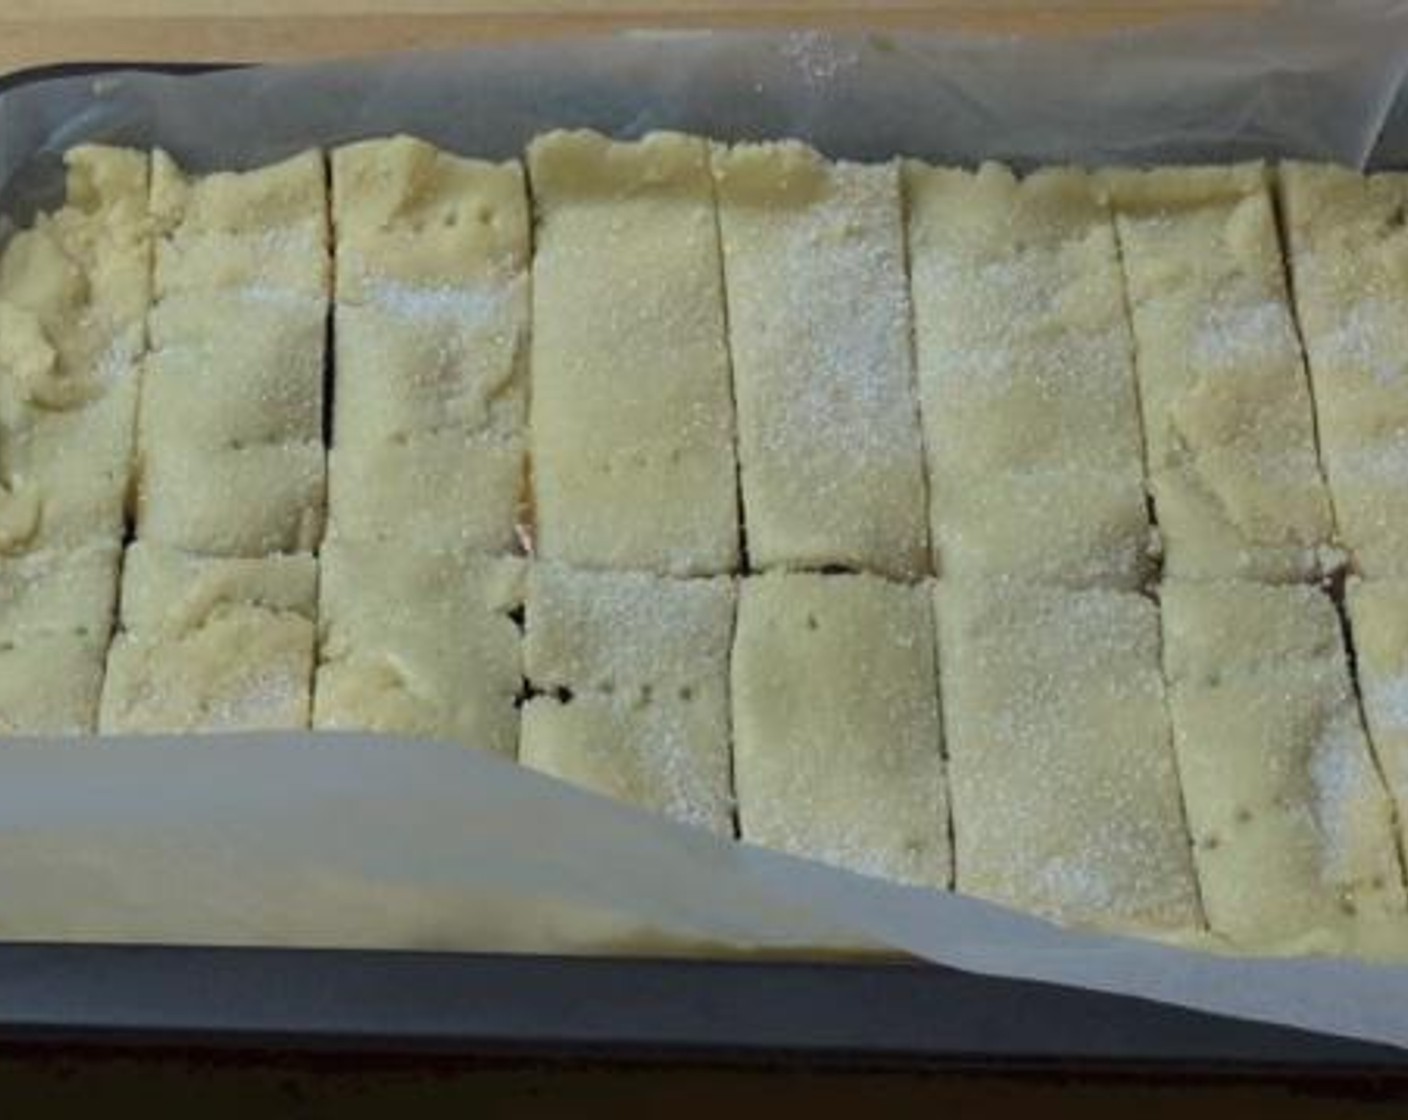 step 6 Before baking, slice the shortbread into pieces. Then, bake inside a preheated oven under 350 degrees F (180 degrees C) for about 30 minutes.